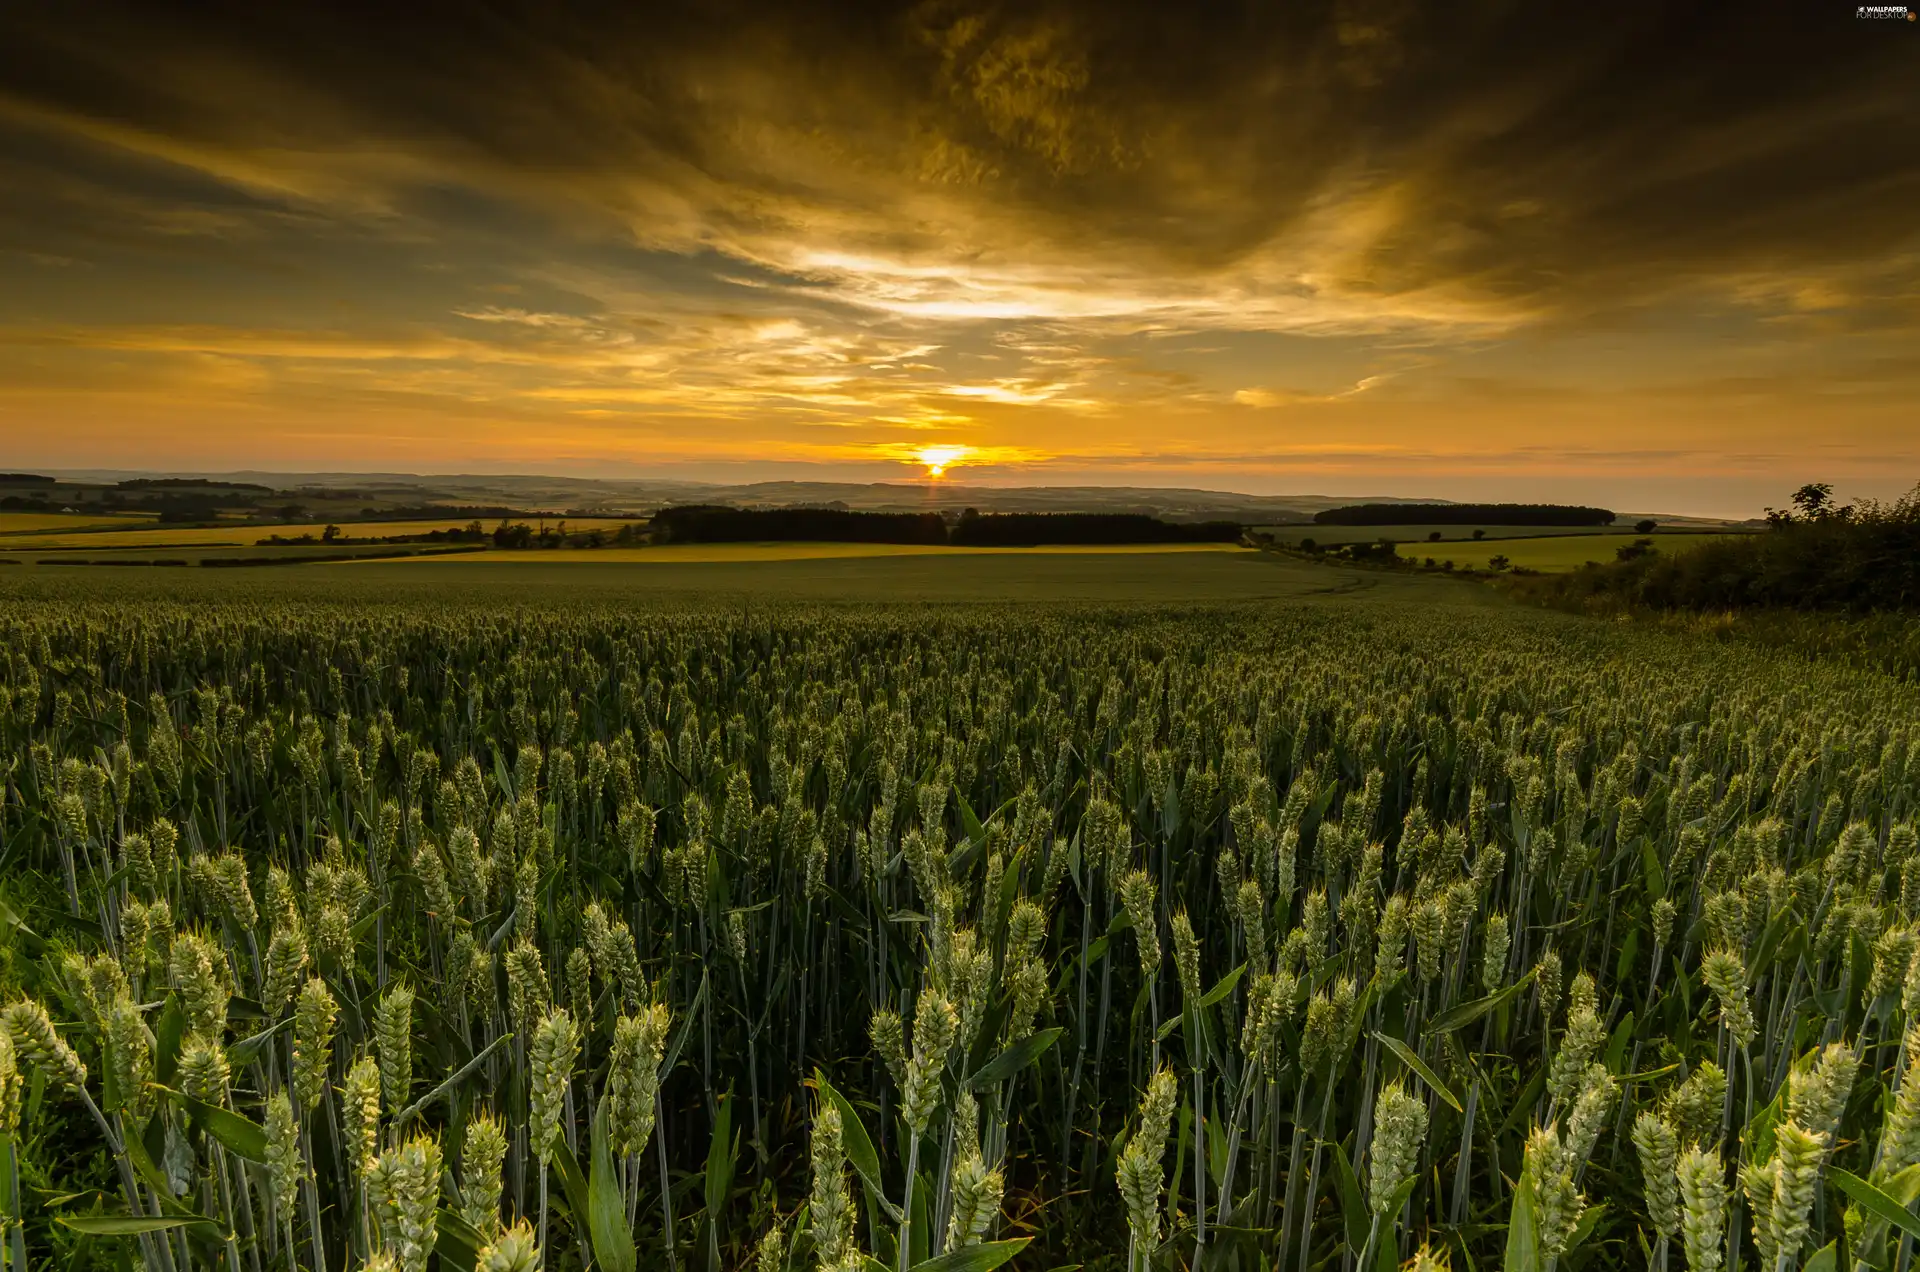 Great Sunsets, Field, wheat